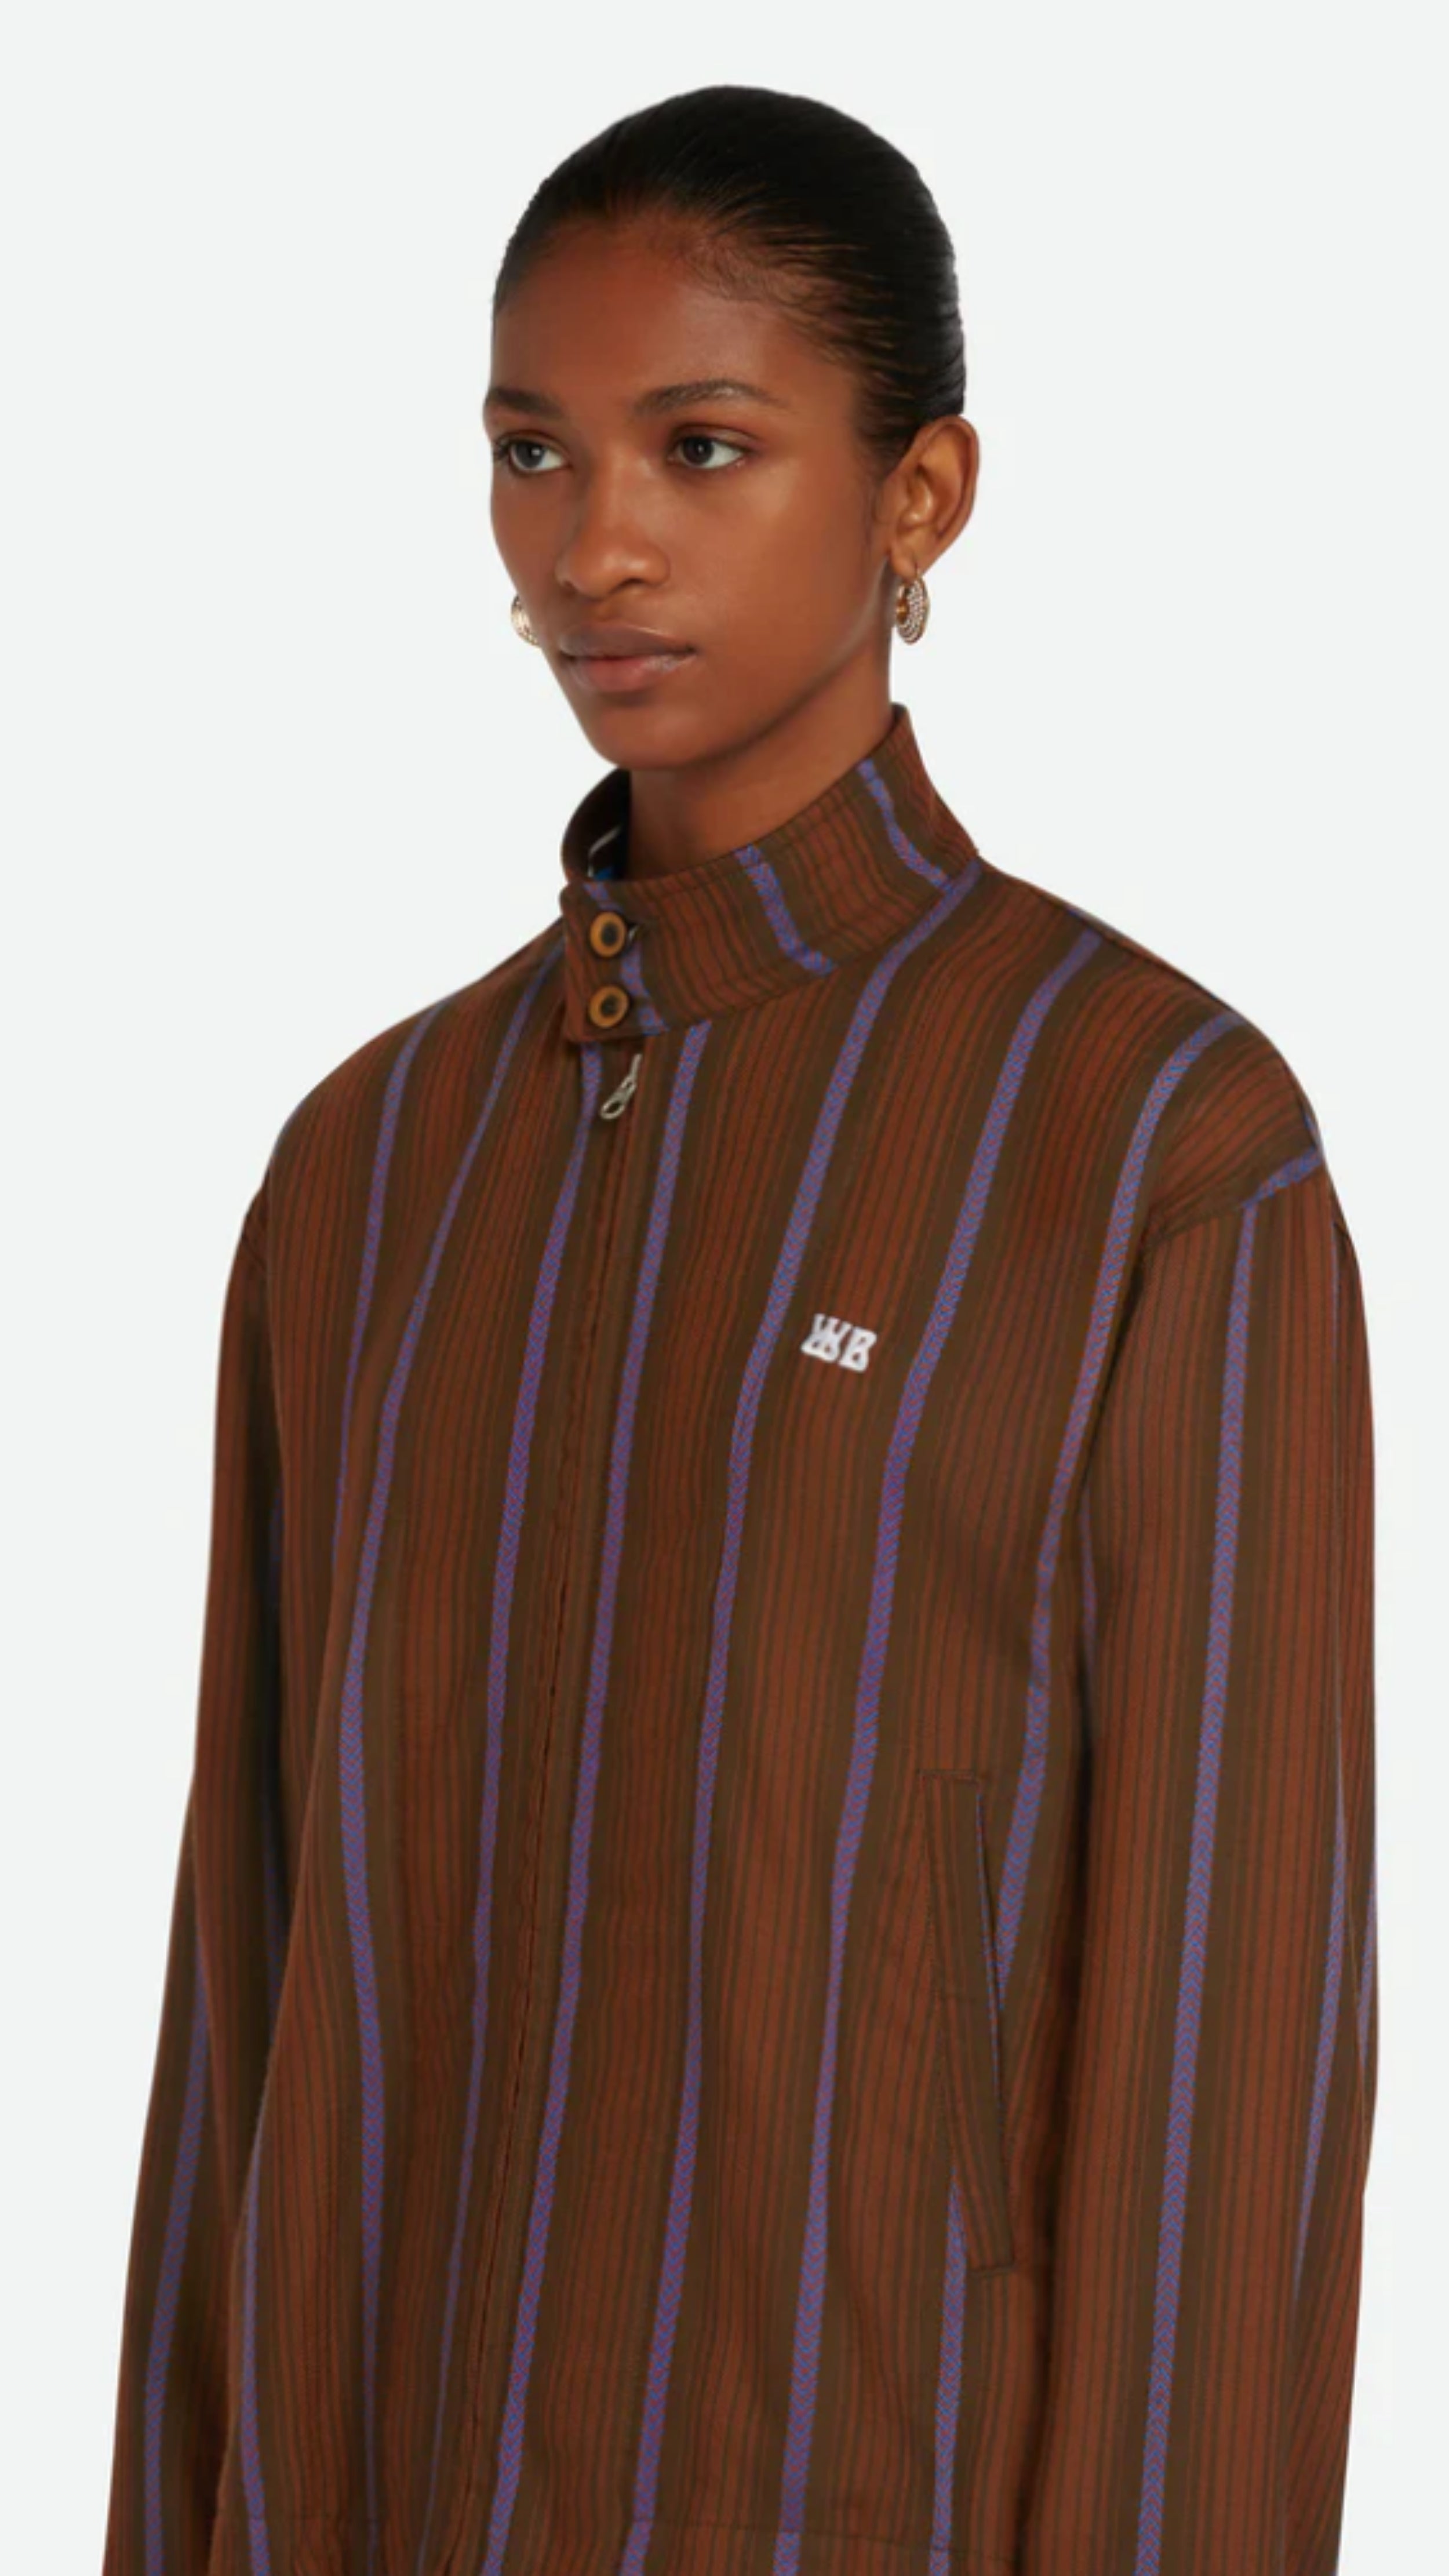 Wales Bonner Life Jacket Italian-made jacket crafted from lightweight herringbone wool in deep brown and blue stripe colors. This coat features long sleeves and a front zipper. Shown on model facing front and close up.